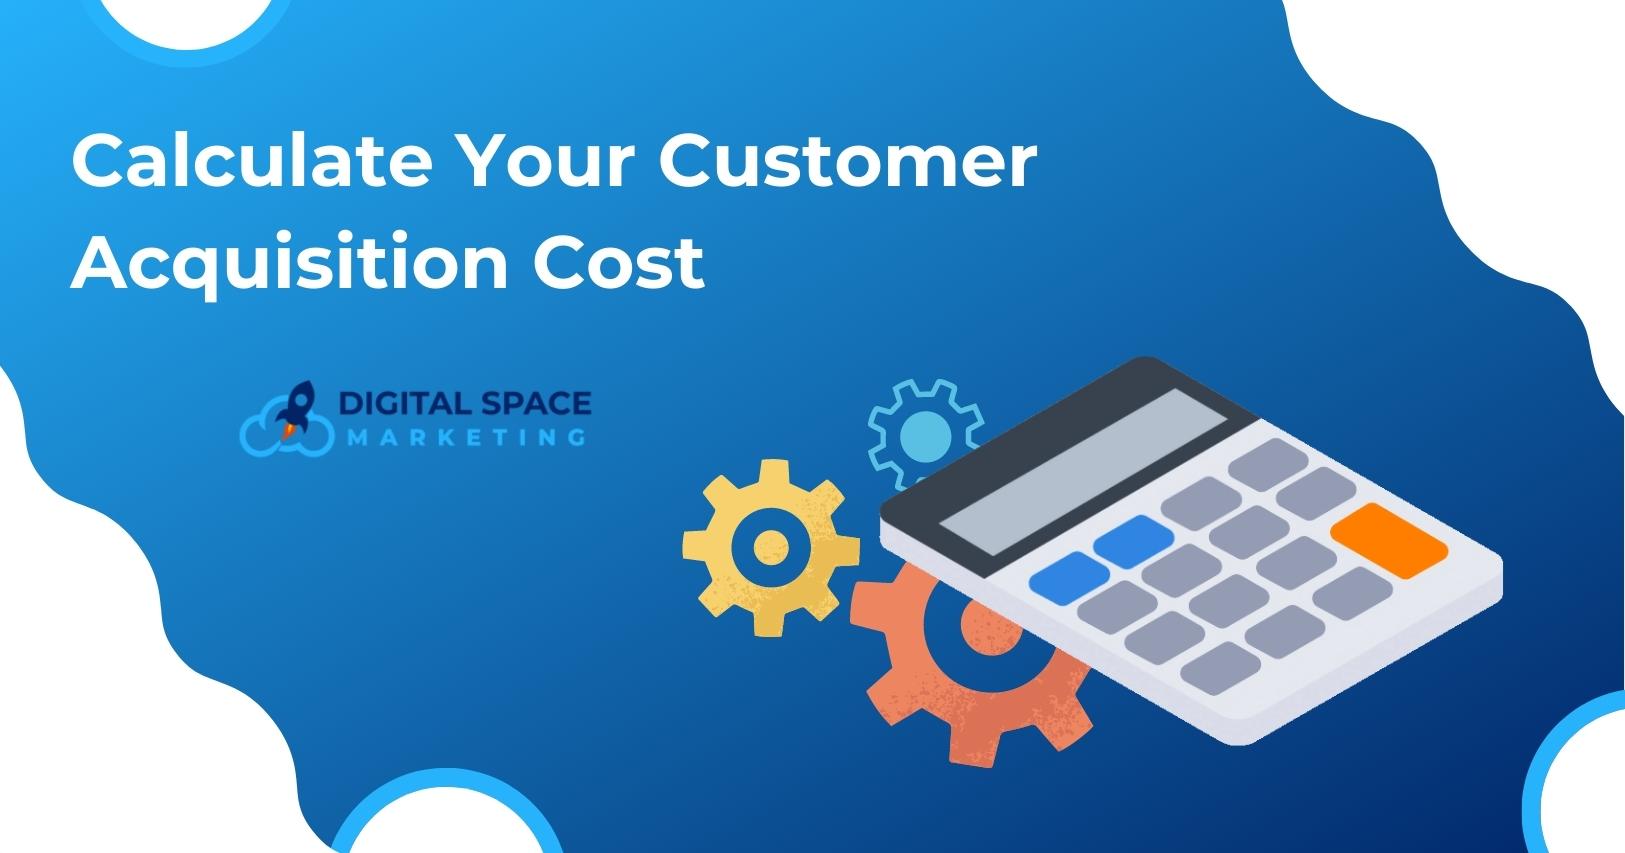 Calculate Your Customer Acquisition Cost